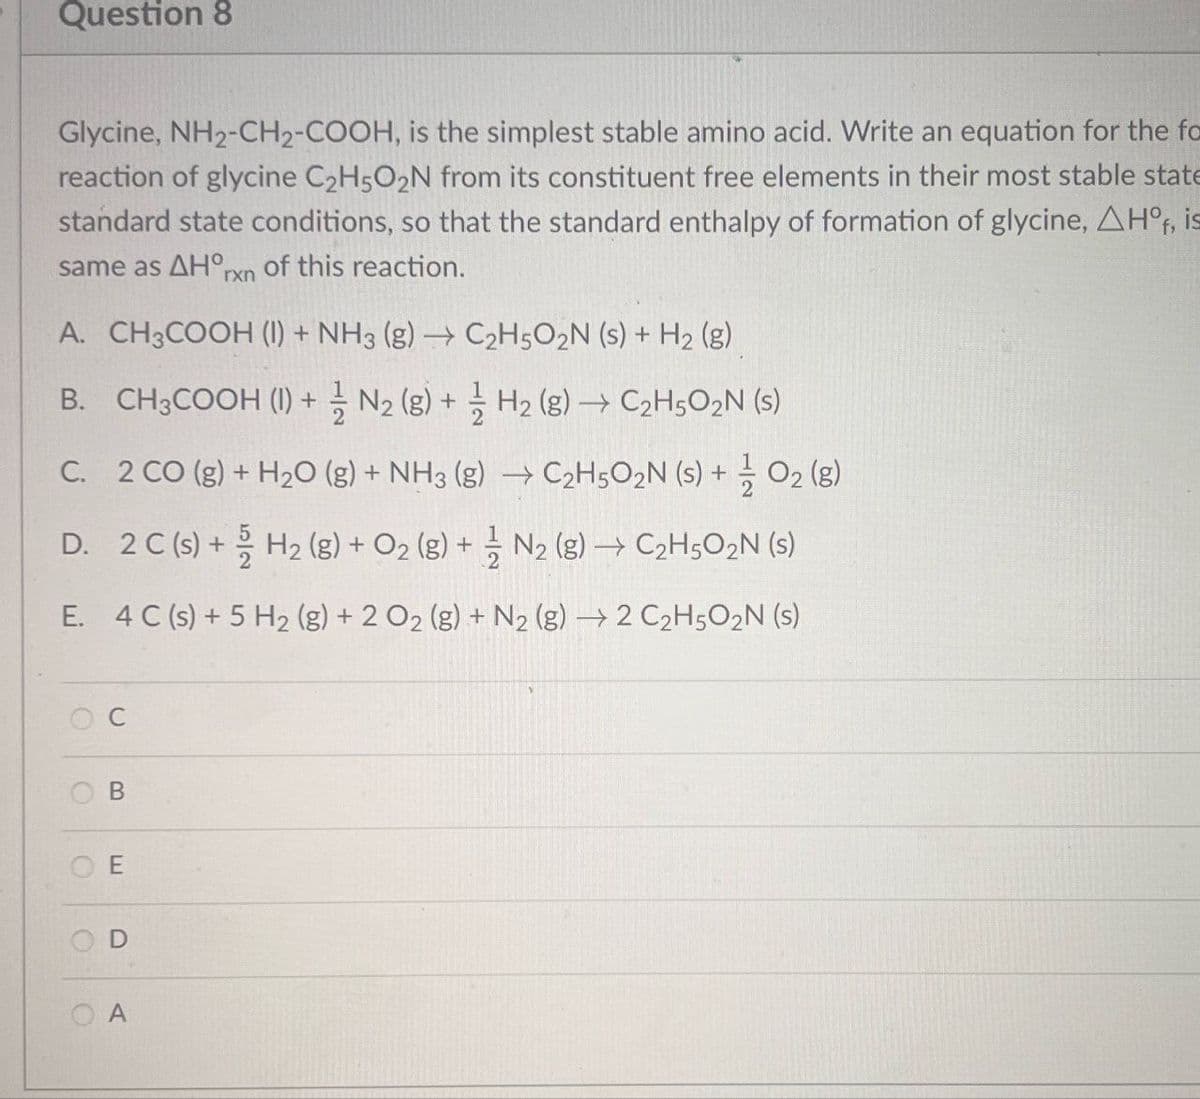 Question 8
Glycine, NH2-CH2-COOH, is the simplest stable amino acid. Write an equation for the fo
reaction of glycine C2H5O2N from its constituent free elements in their most stable state
standard state conditions, so that the standard enthalpy of formation of glycine, AHO, is
same as AHO of this reaction.
rxn
A. CH3COOH (1) + NH3 (g) → C2H5O2N (s) + H2 (g)
B. CH3COOH (1) + N2 (g) + H2(g) → C2H5O₂N (s)
C. 2 CO (g) + H2O (g) + NH3 (g) →C2H5O2N (s) + O2(g)
D. 2 C (s) + H2(g) + O2(g) + ½ N2 (g) → C2H5O2N (s)
E. 4 C (s) + 5 H2 (g) + 2 O2 (g) + N2 (g) 2 C2H5O2N (s)
C
B
OE
O
D
A